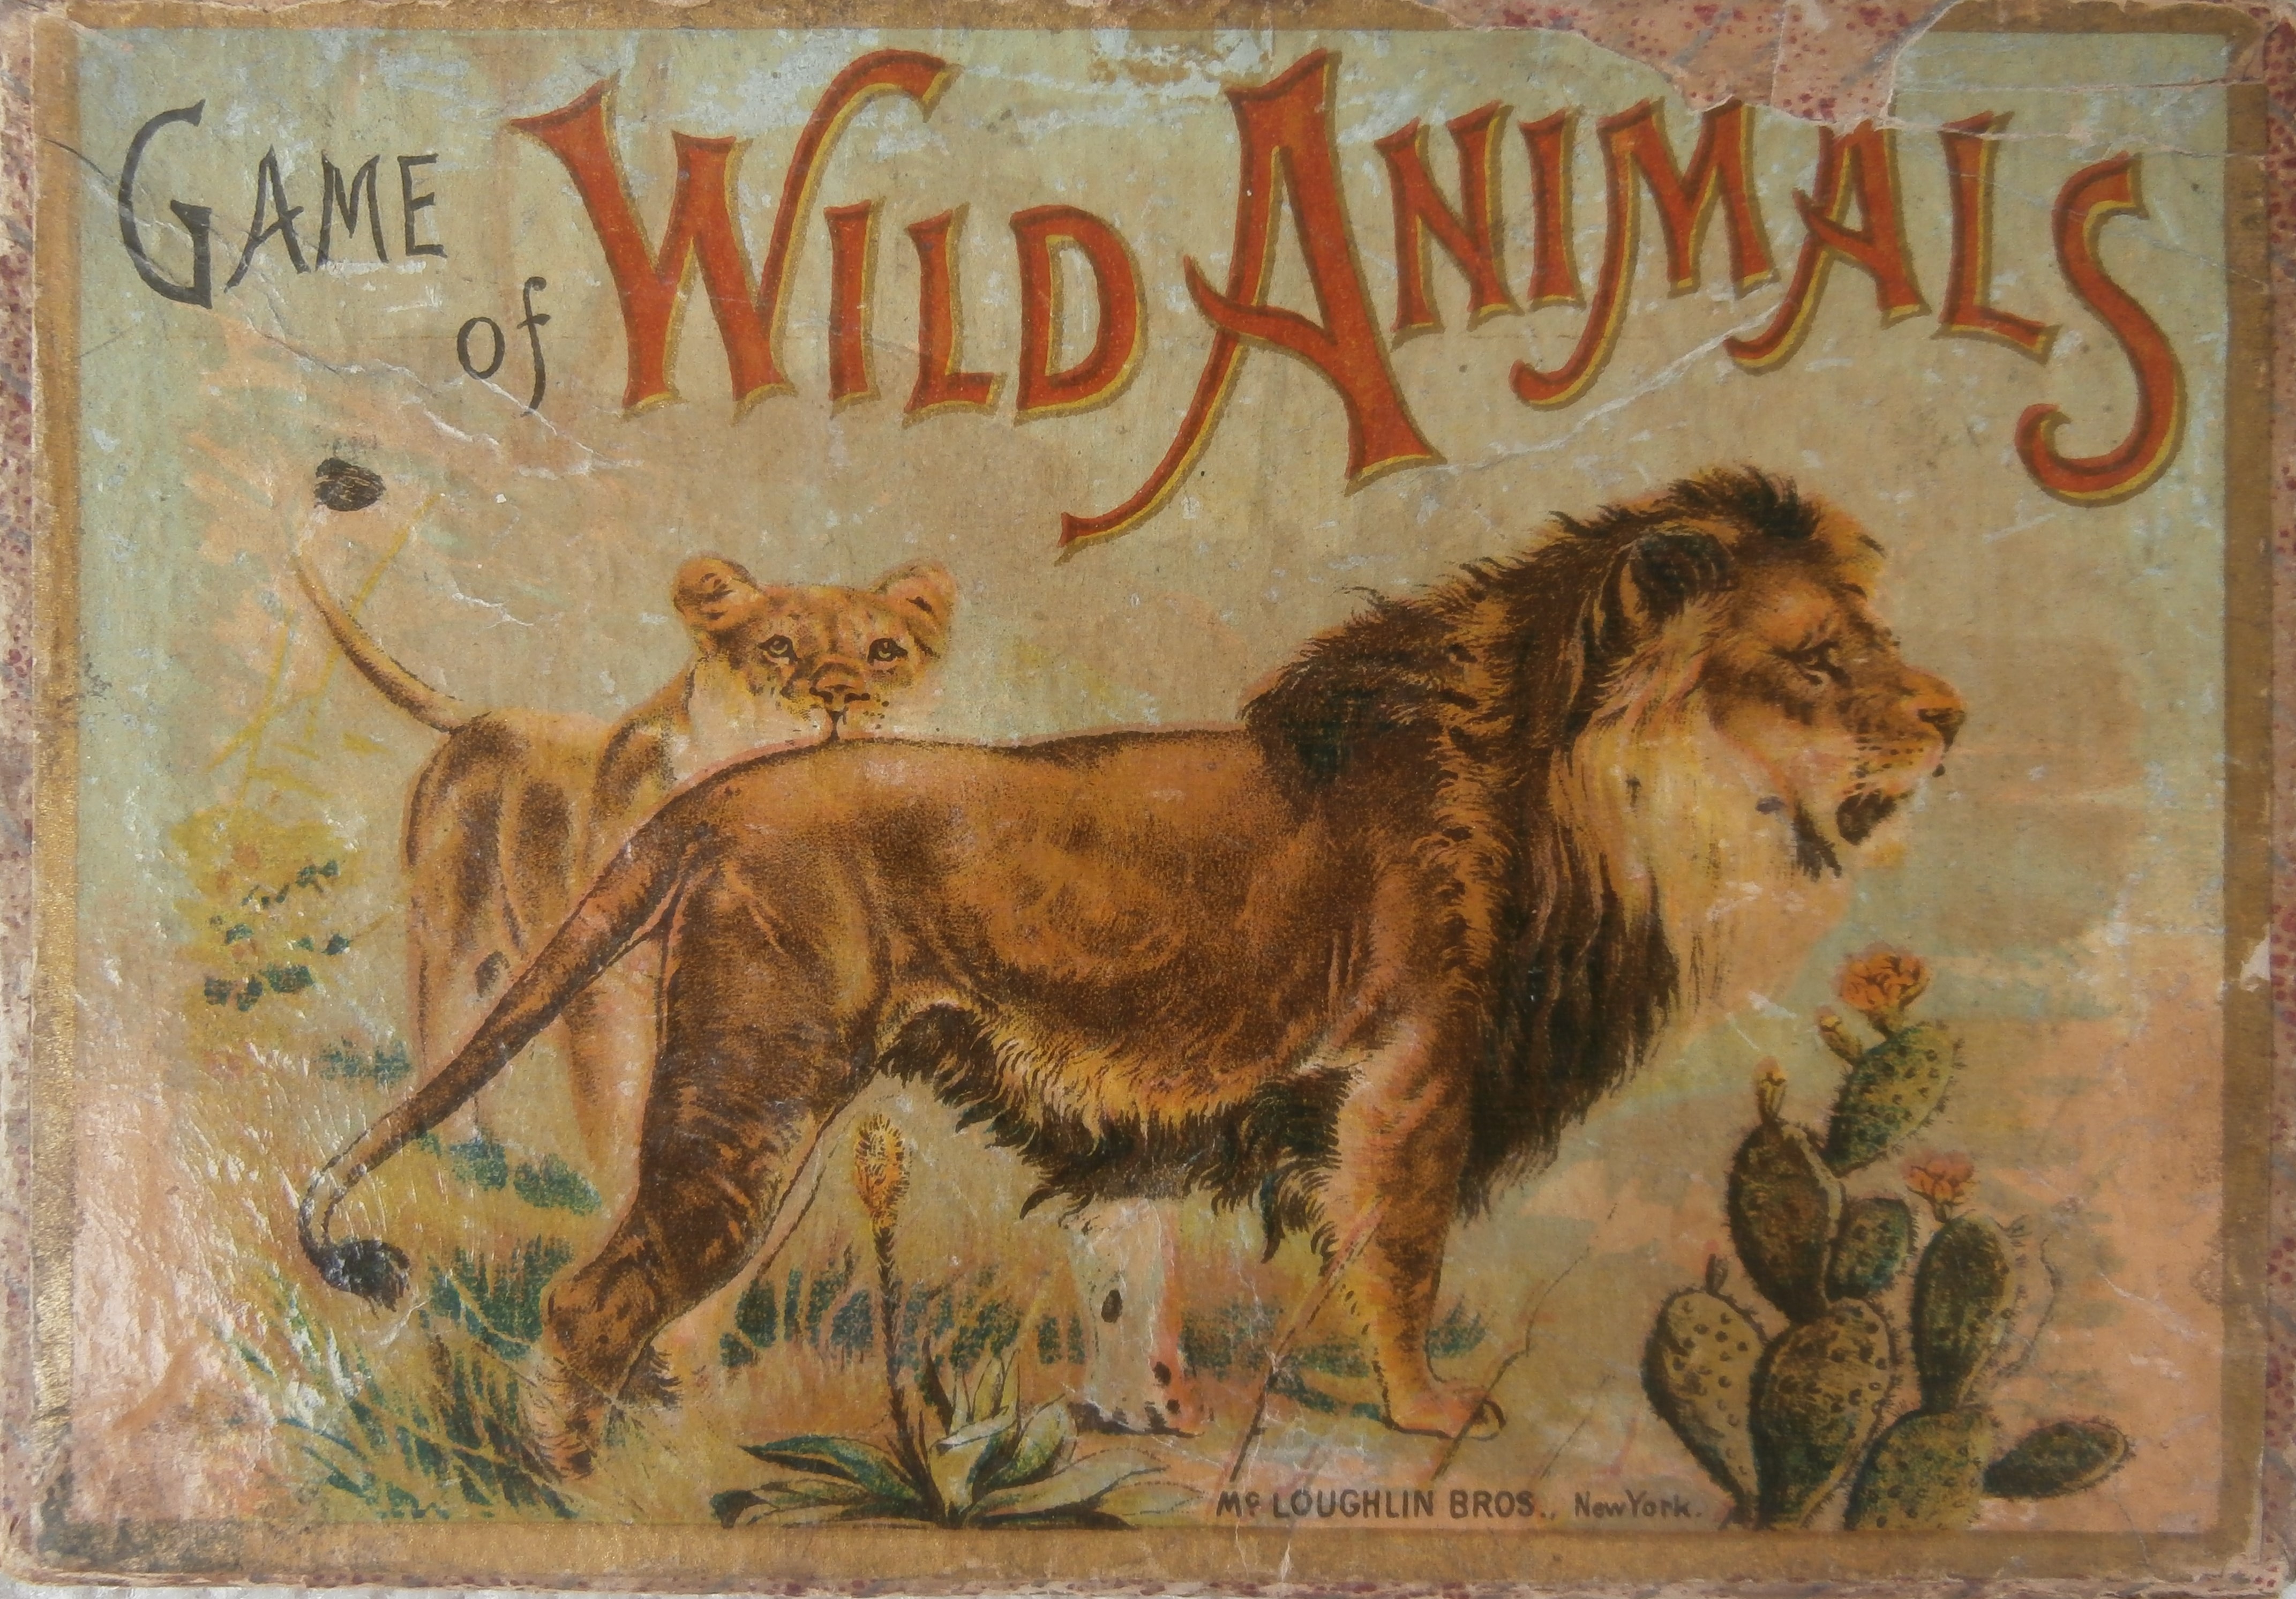 Antique Game of Wild Animals by Mcloughlin Bros